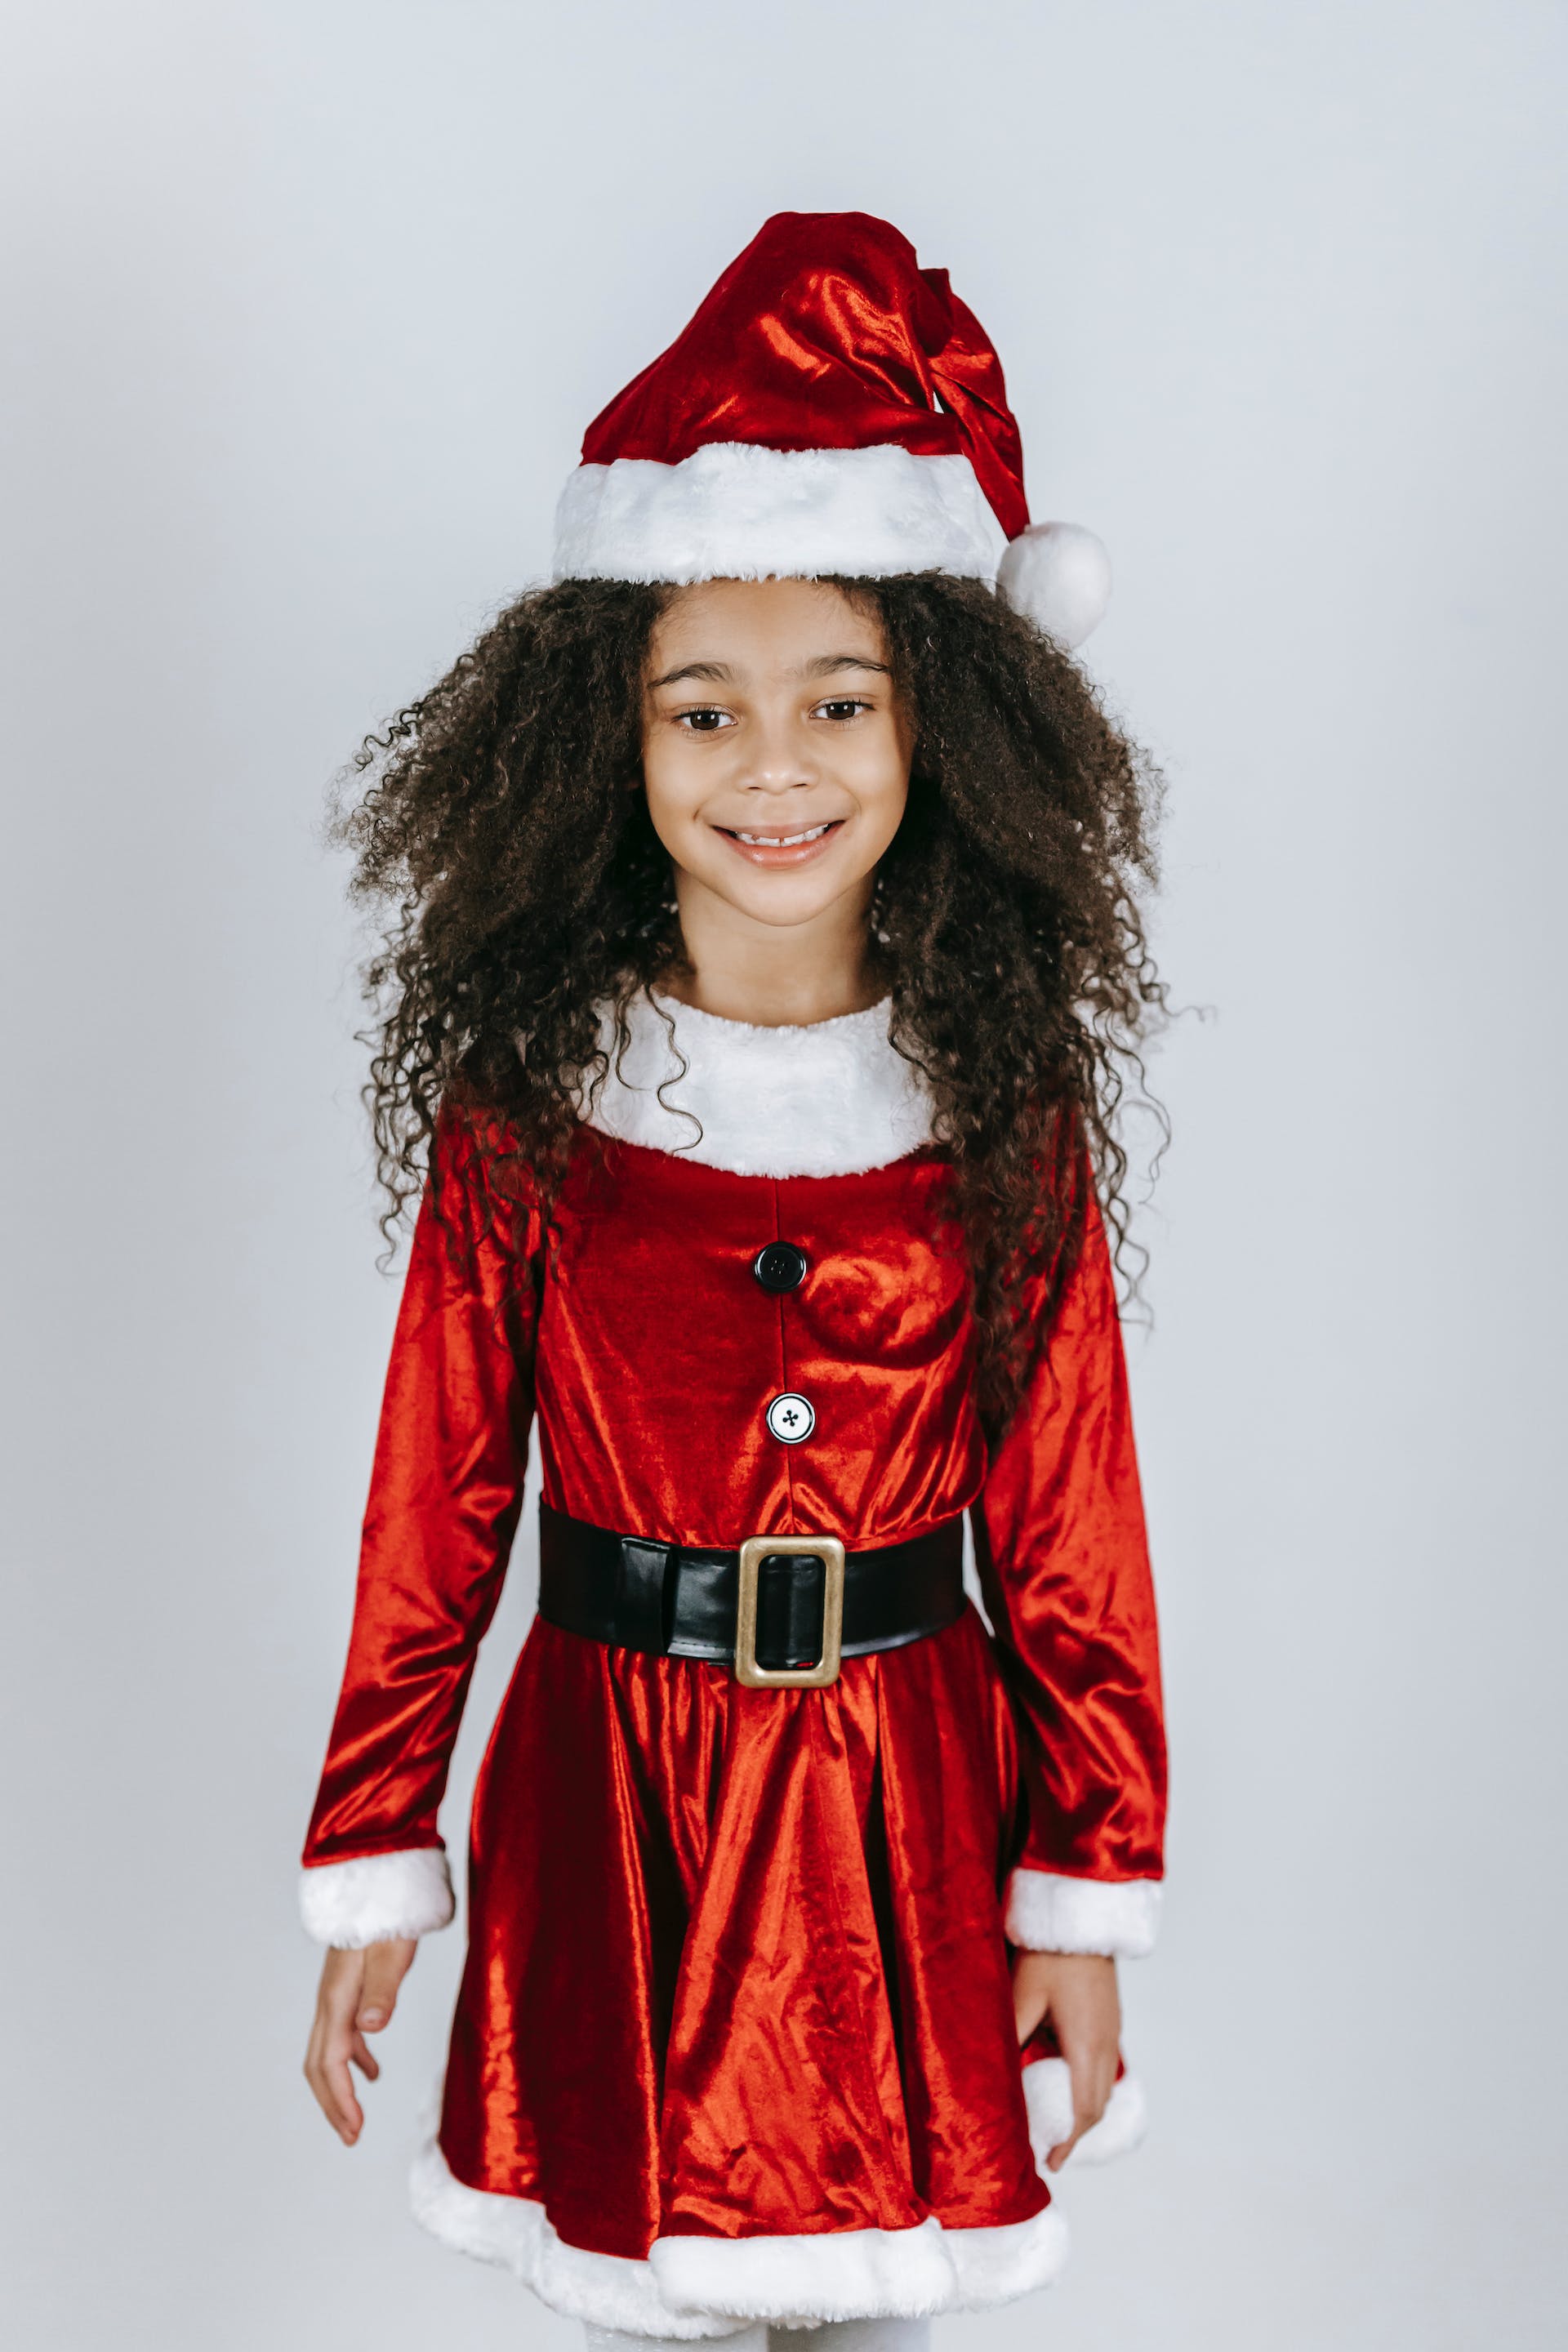 A little girl in Santa Claus outfit | Source: Pexels